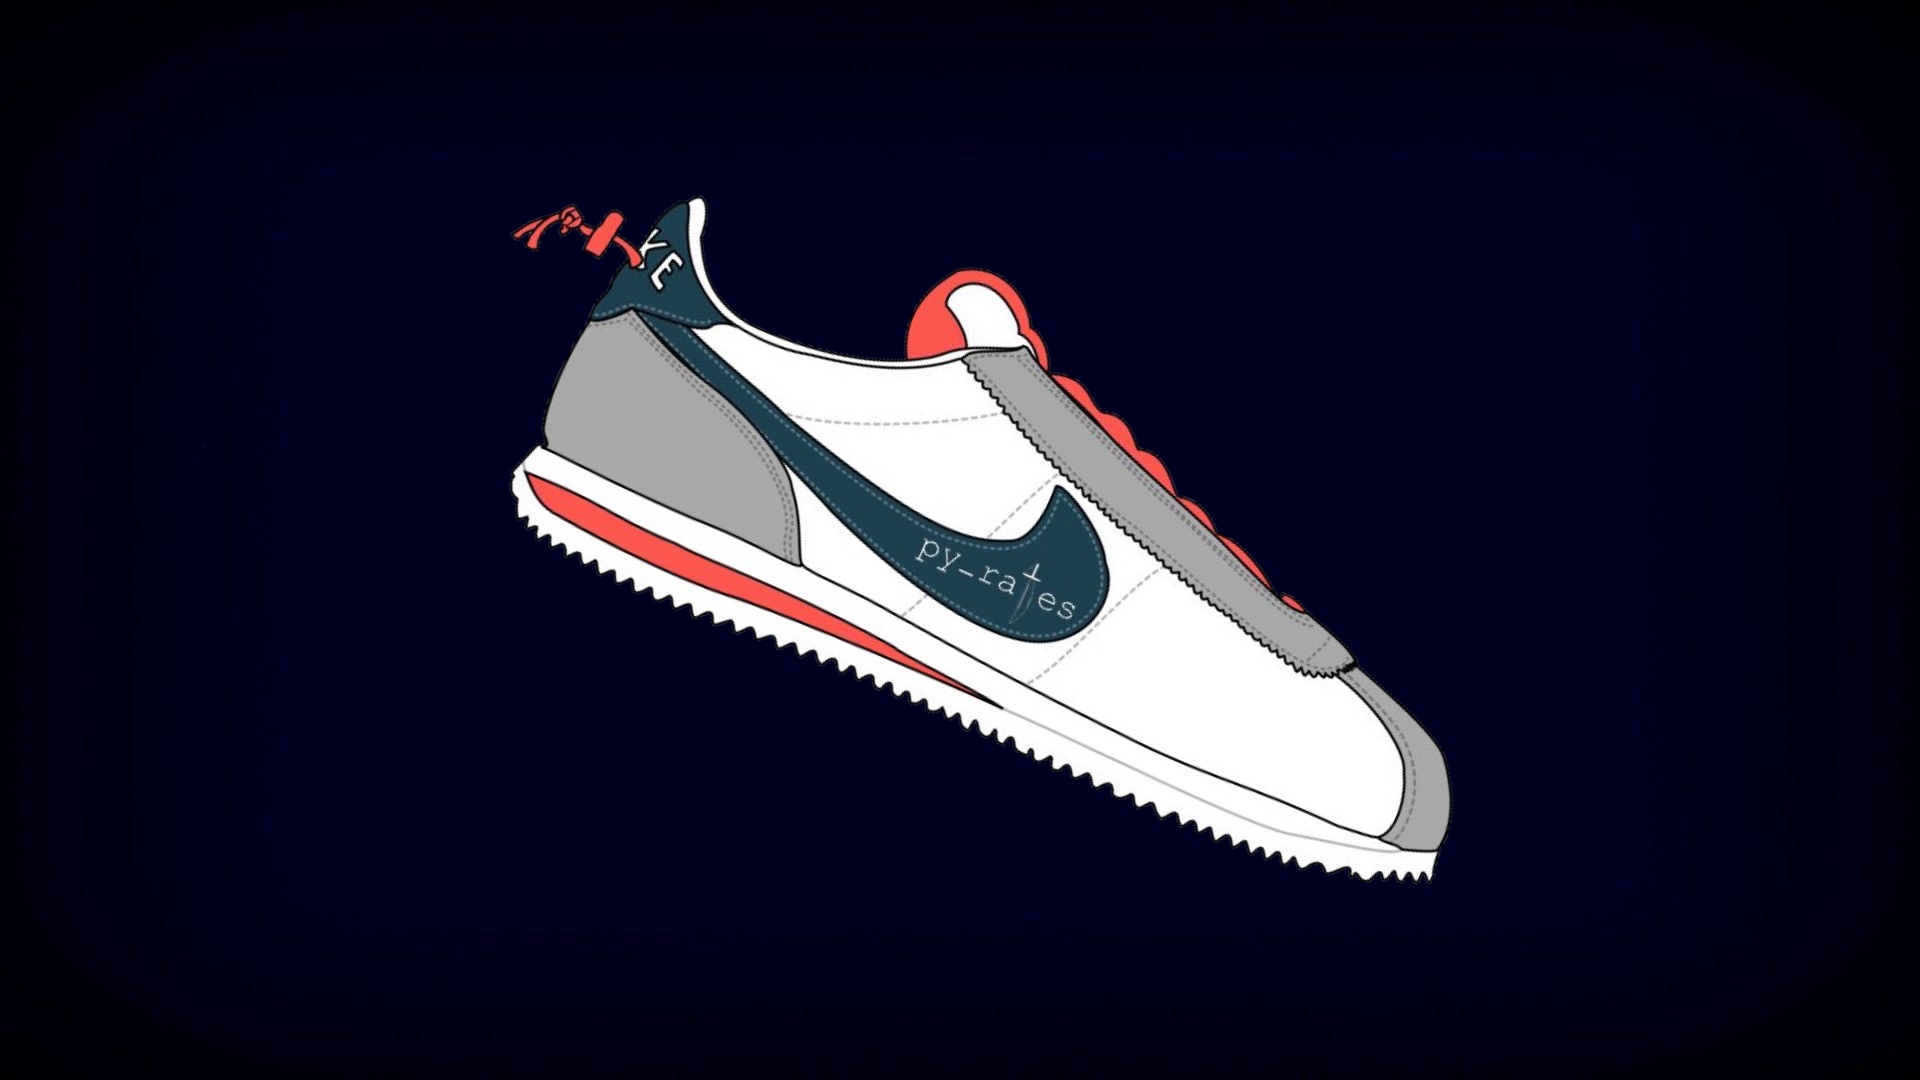 A Kendrick Lamar x Nike Cortez Launches Globally This Month In Laceless Construct. The Sole Supplier